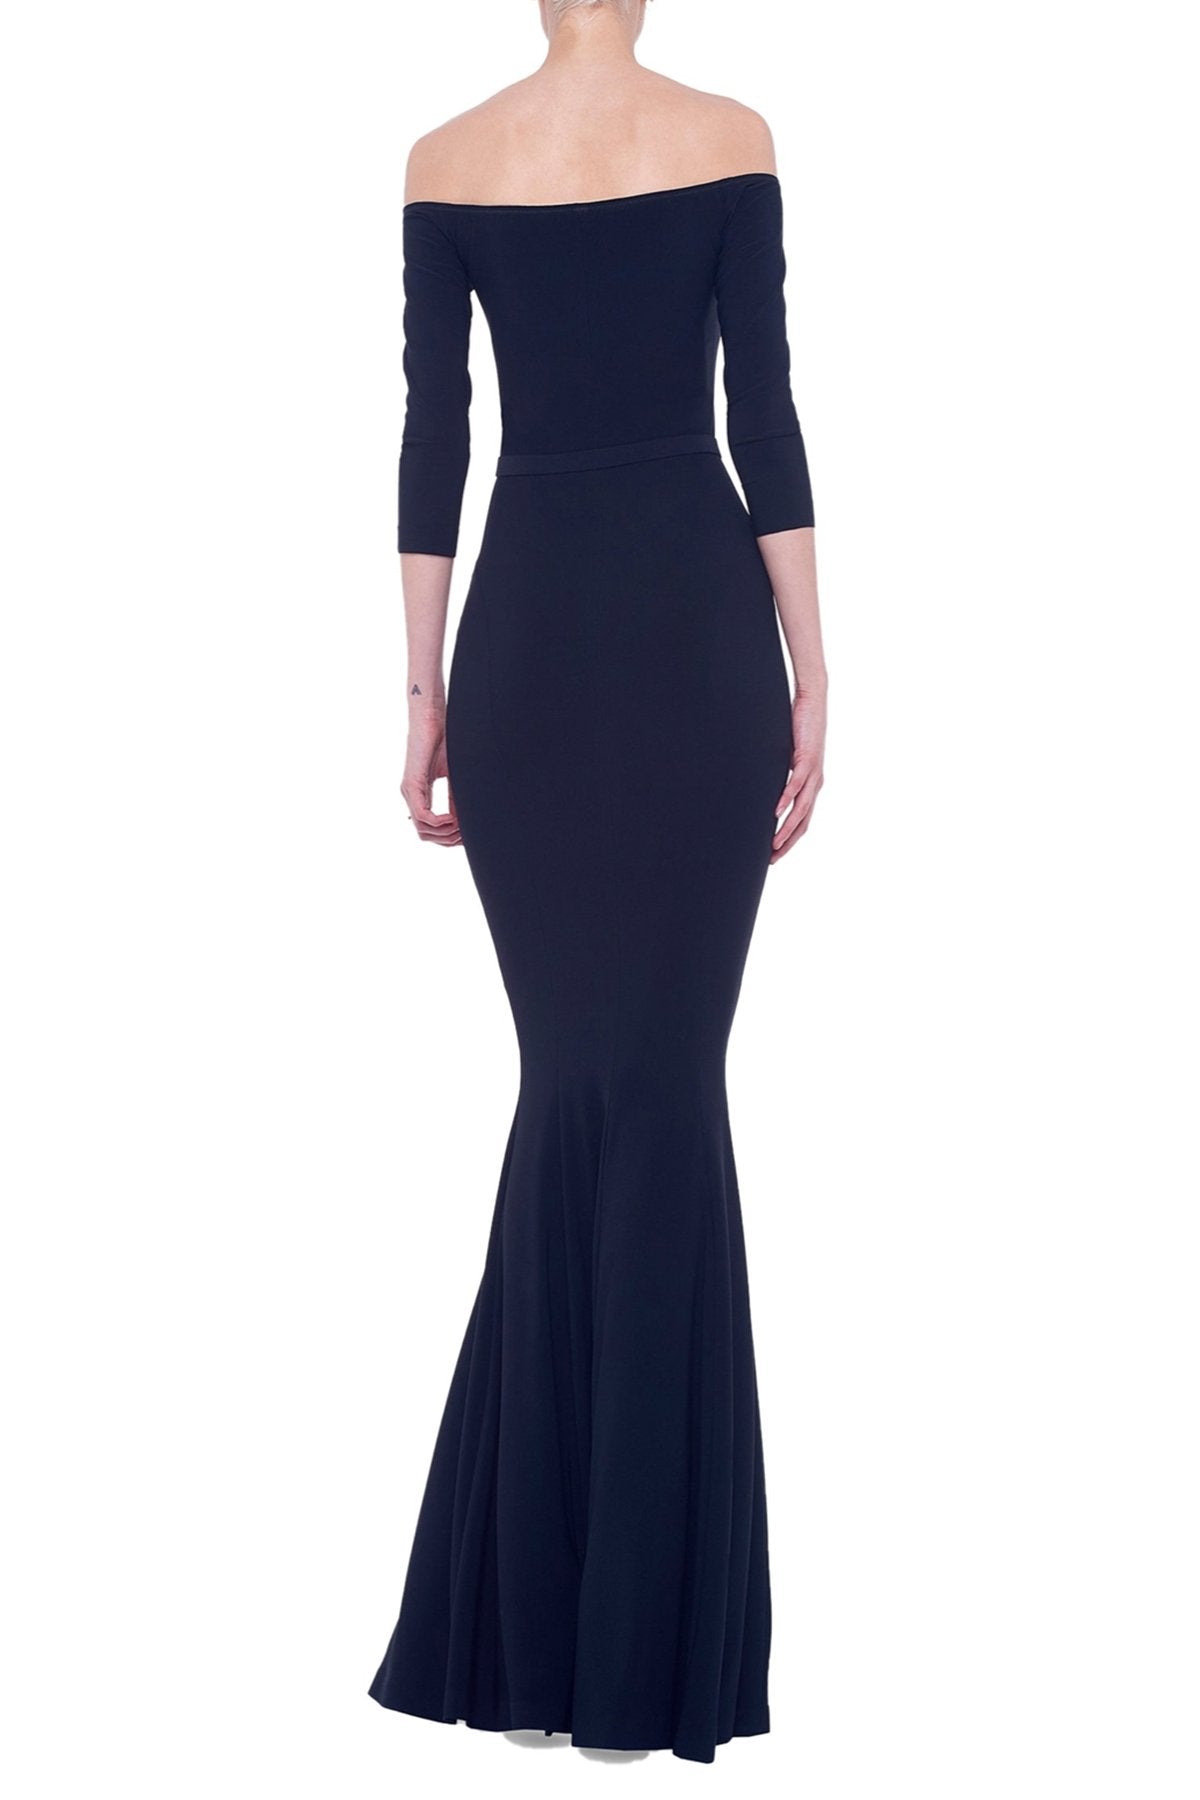 Off Shoulder Fishtail Gown in Black